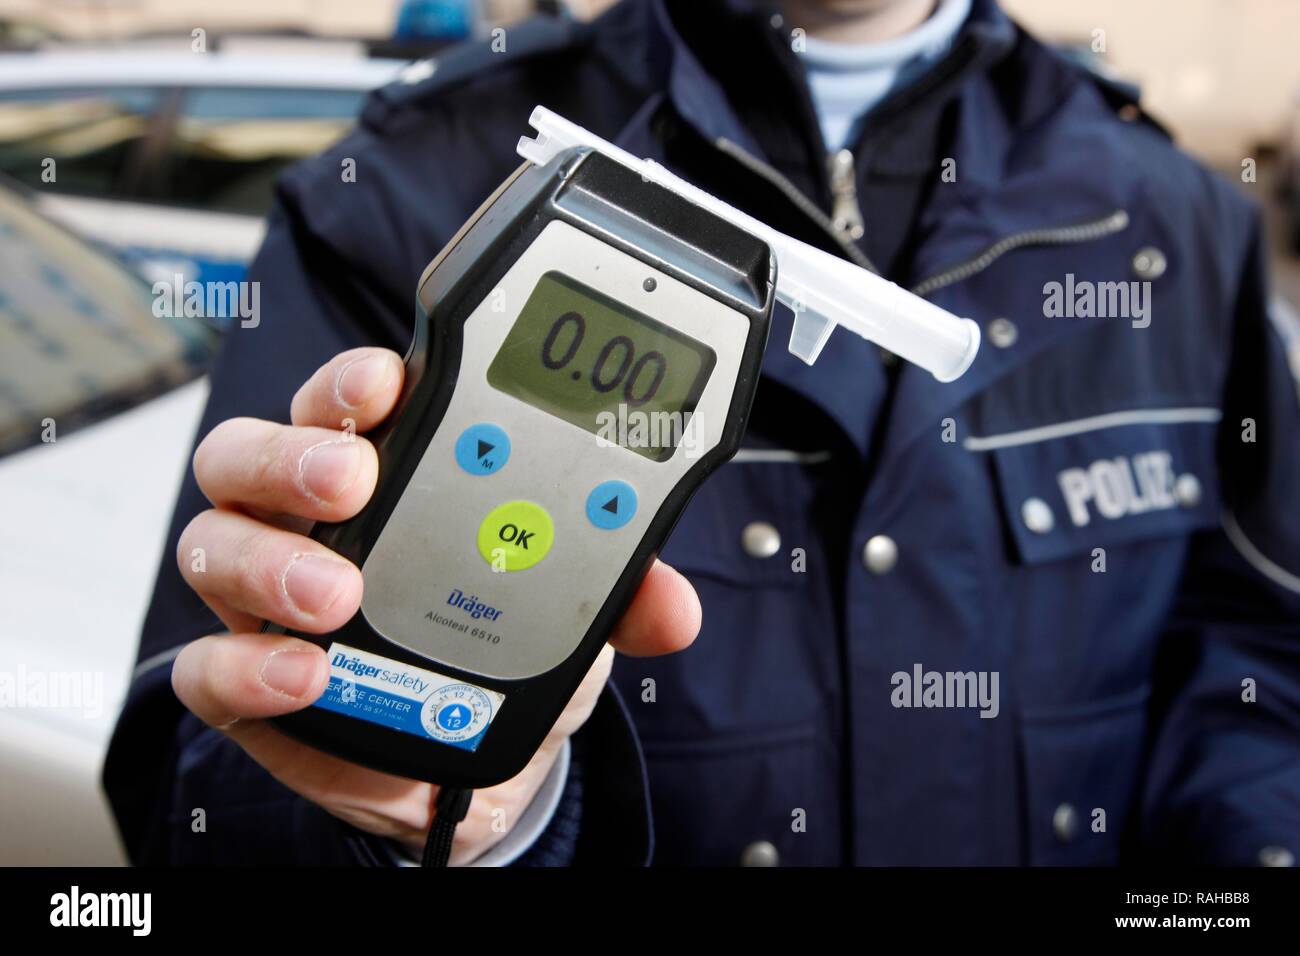 https://c8.alamy.com/comp/RAHBB8/policeman-holding-a-breath-alcohol-tester-to-check-the-ability-of-a-driver-to-drive-a-car-showing-a-reading-of-000-per-RAHBB8.jpg